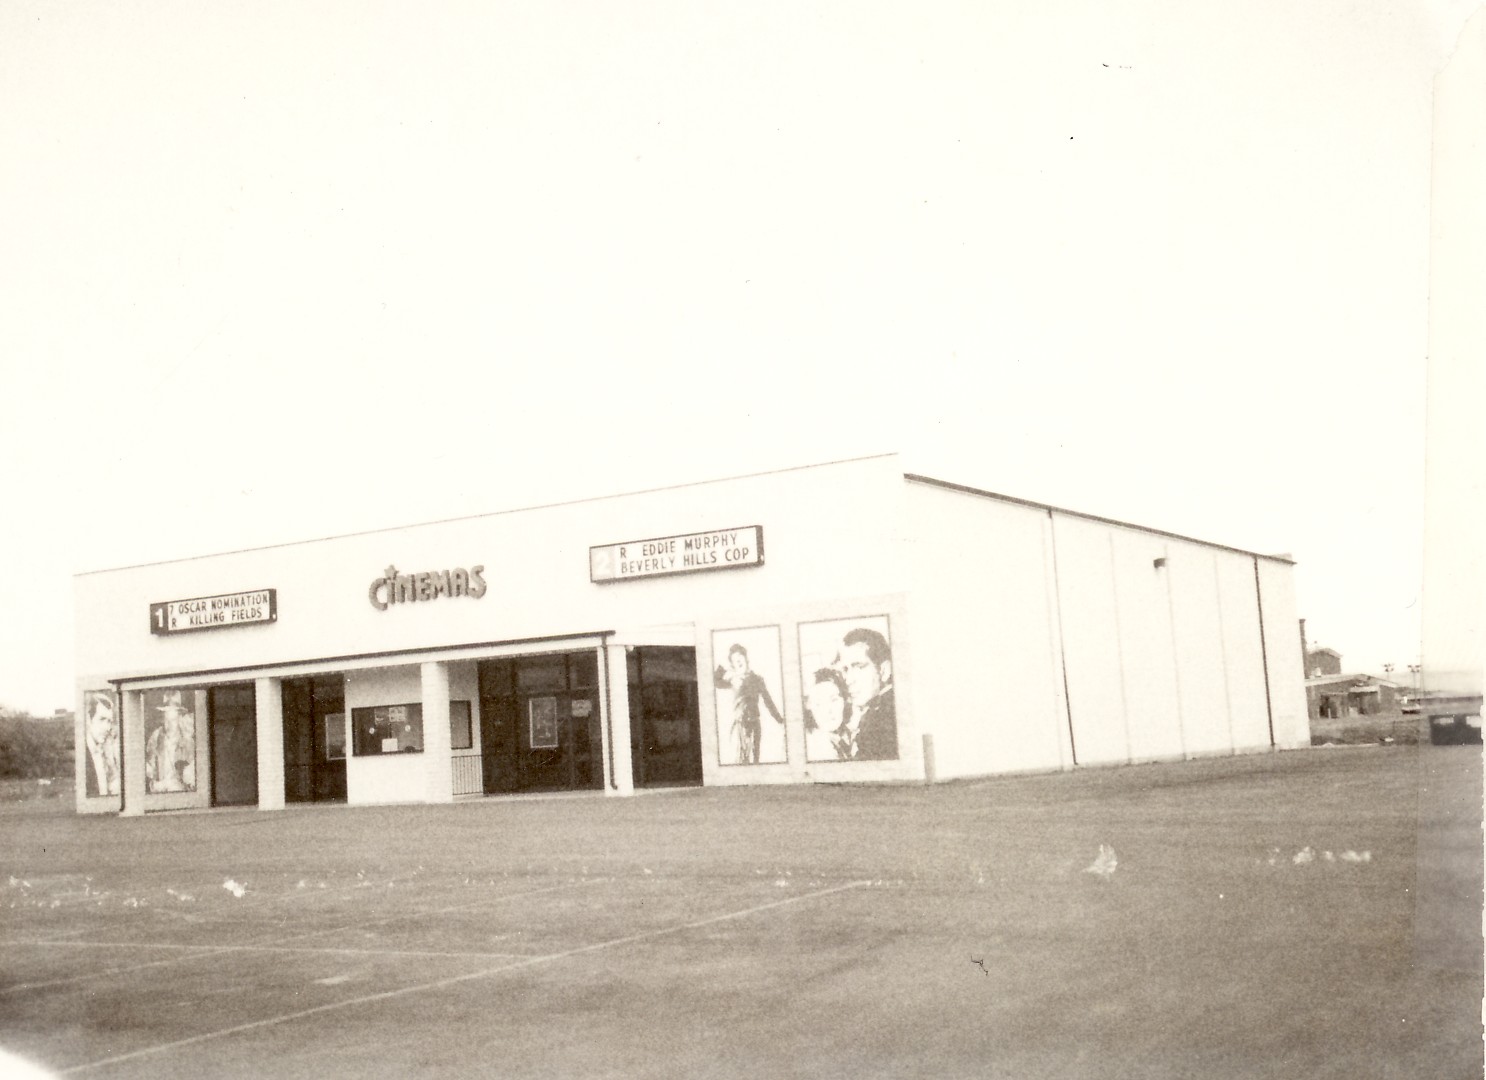 Photo of the Cinemas building at 905 S. Main St. in St George